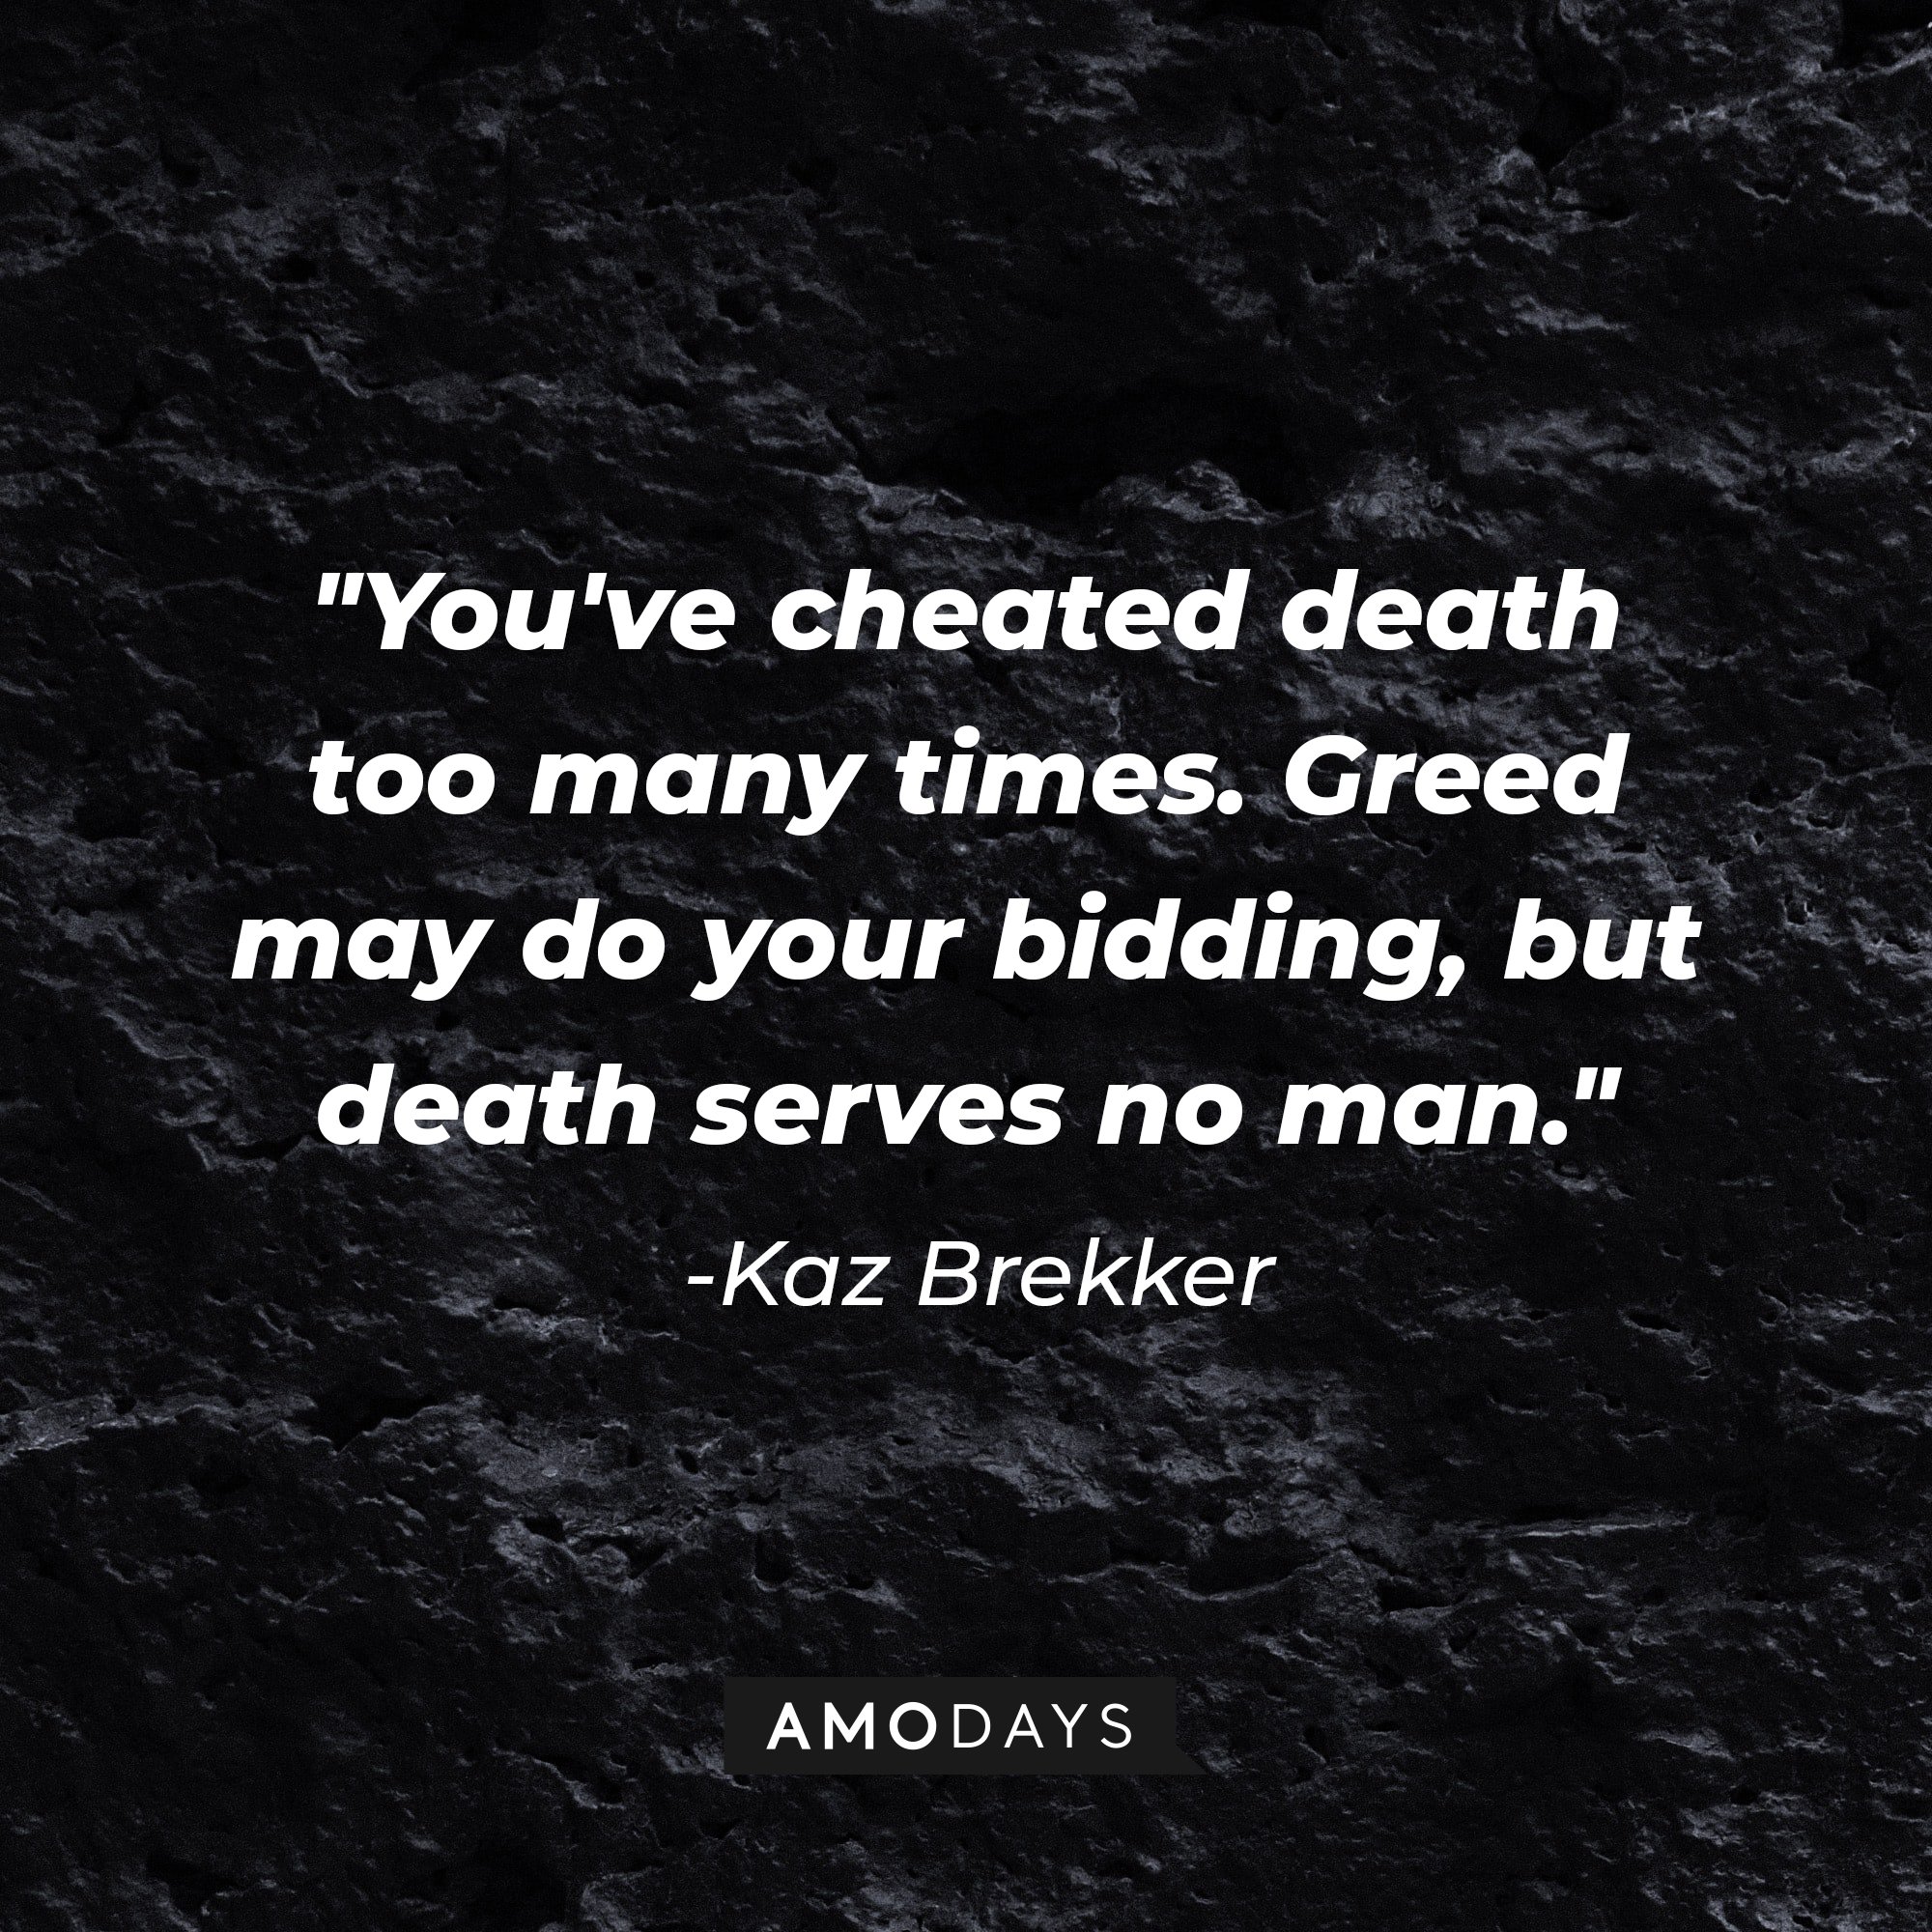 Kaz Brekker’s quote: "You've cheated death too many times. Greed may do your bidding, but death serves no man." | Image: AmoDays